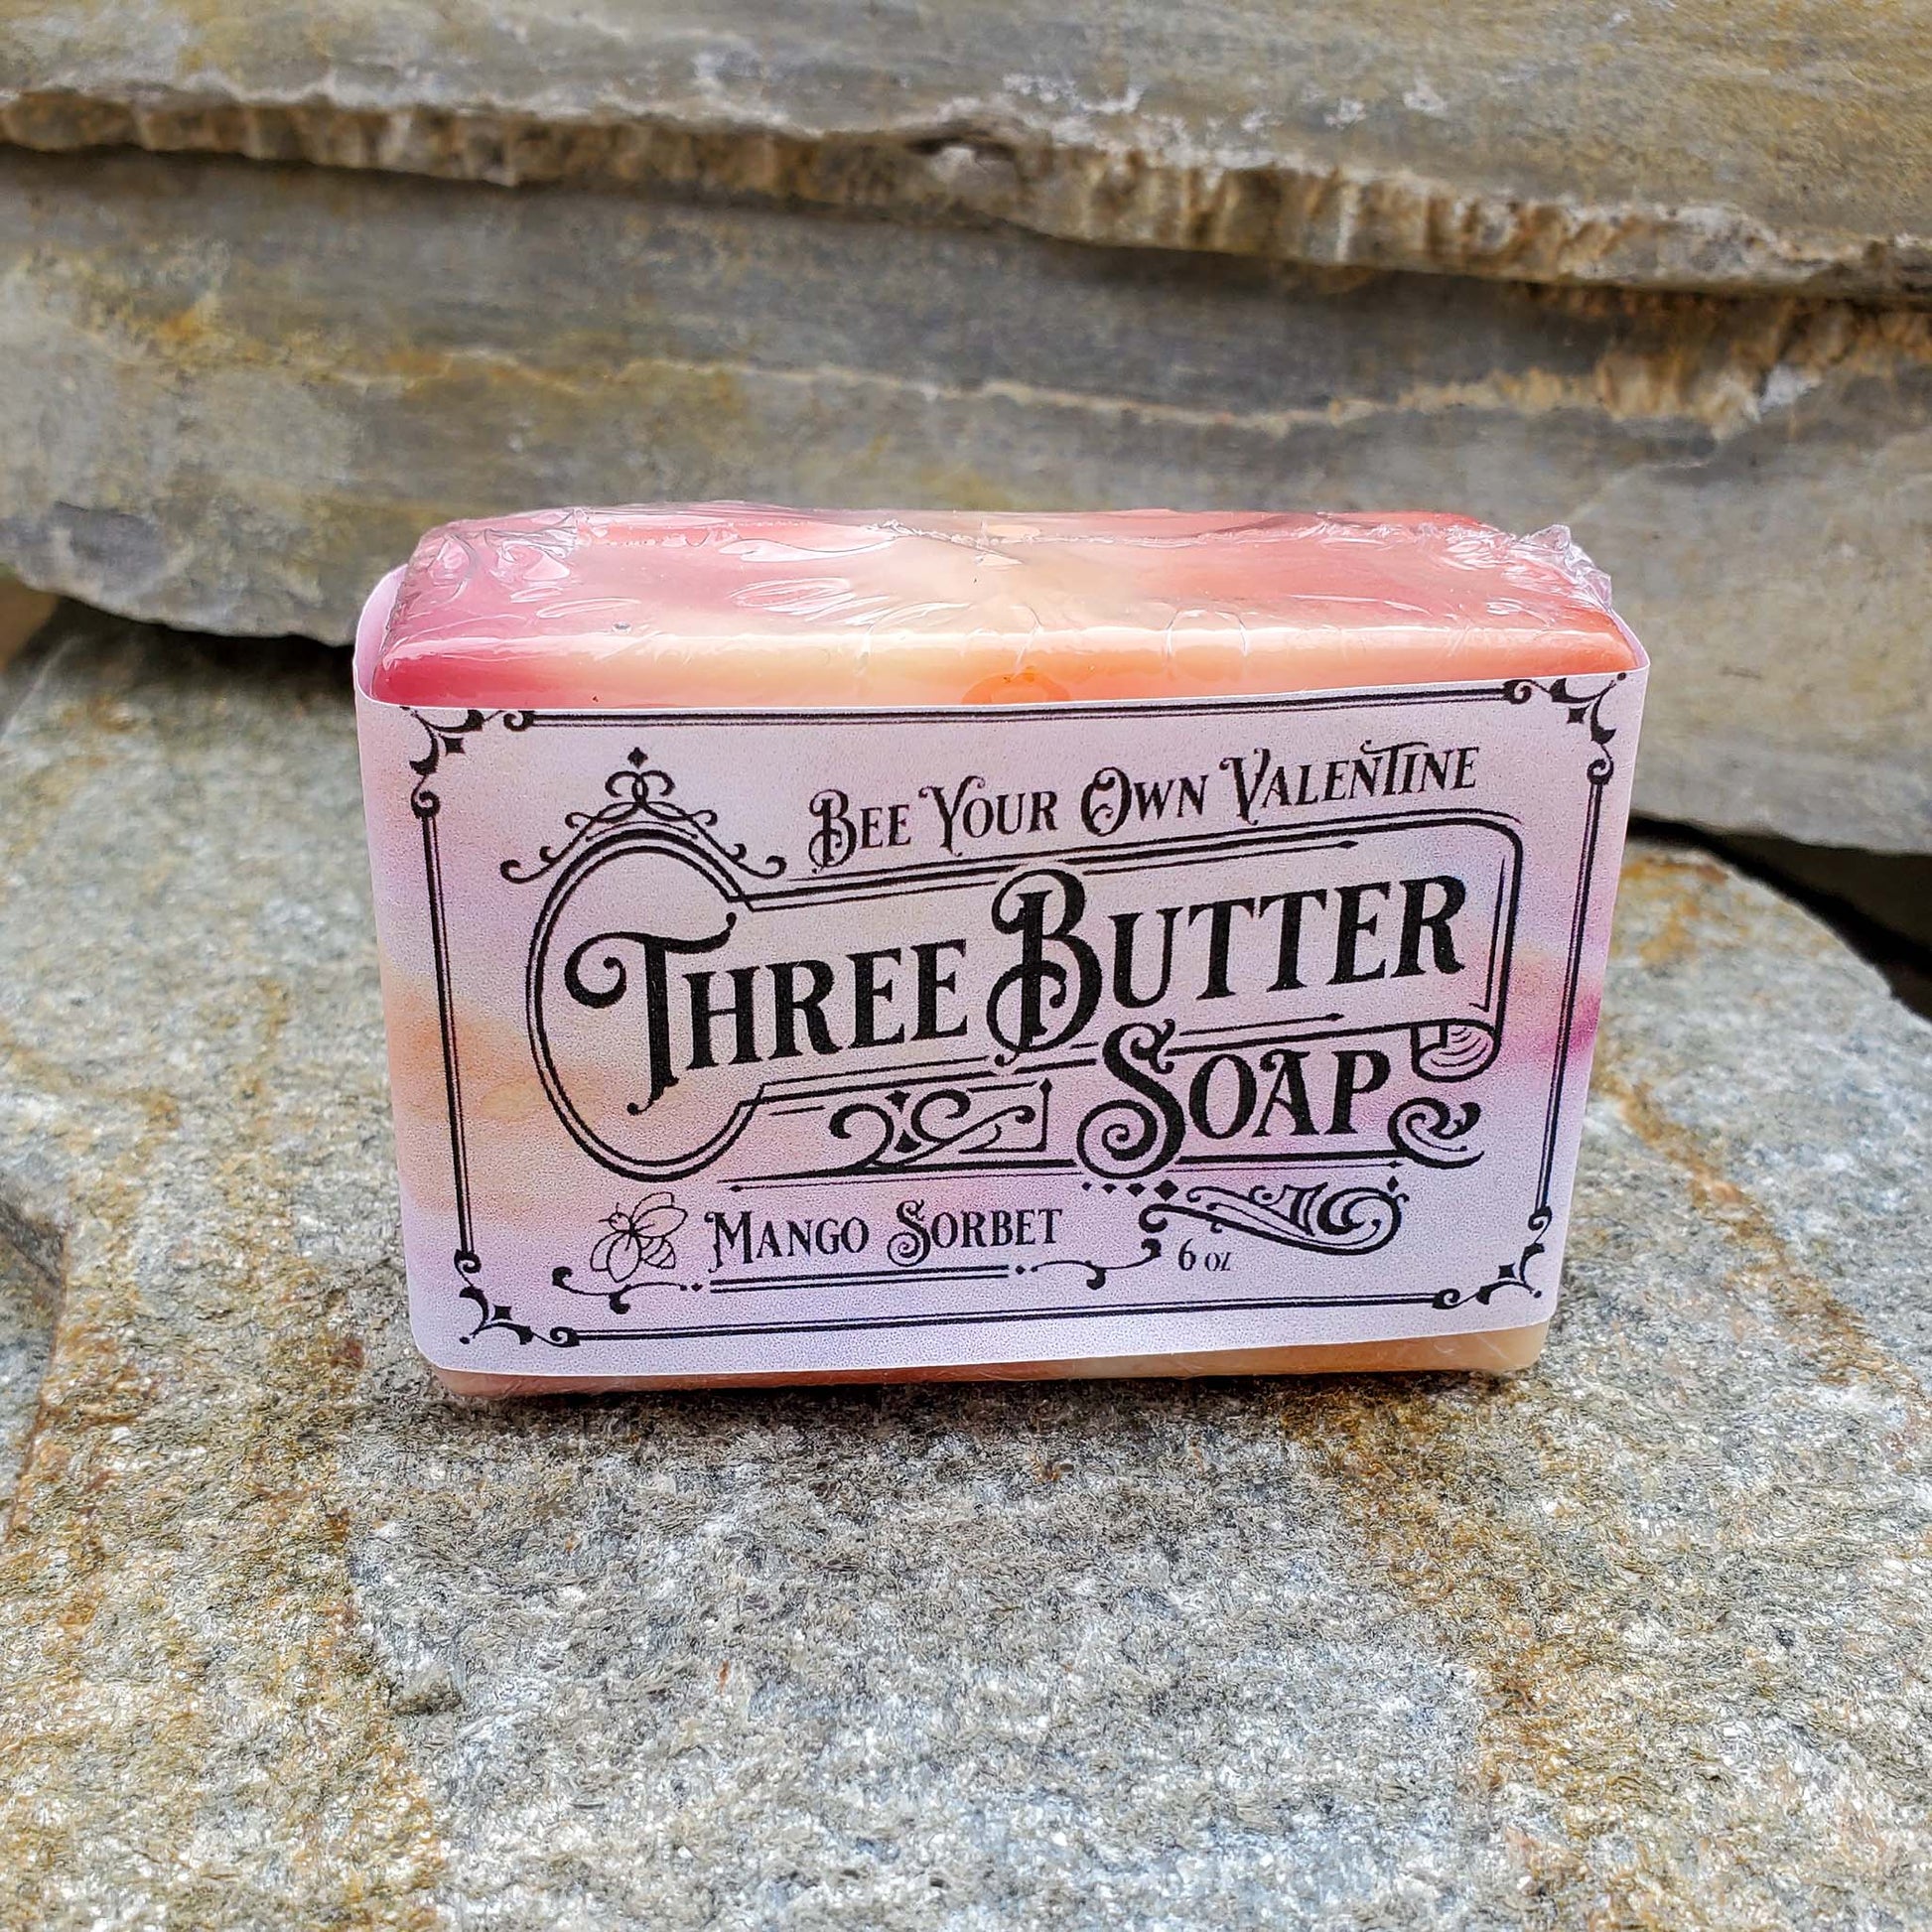 Bee Your Own Valentine Three Butter Soap Mango Sorbet